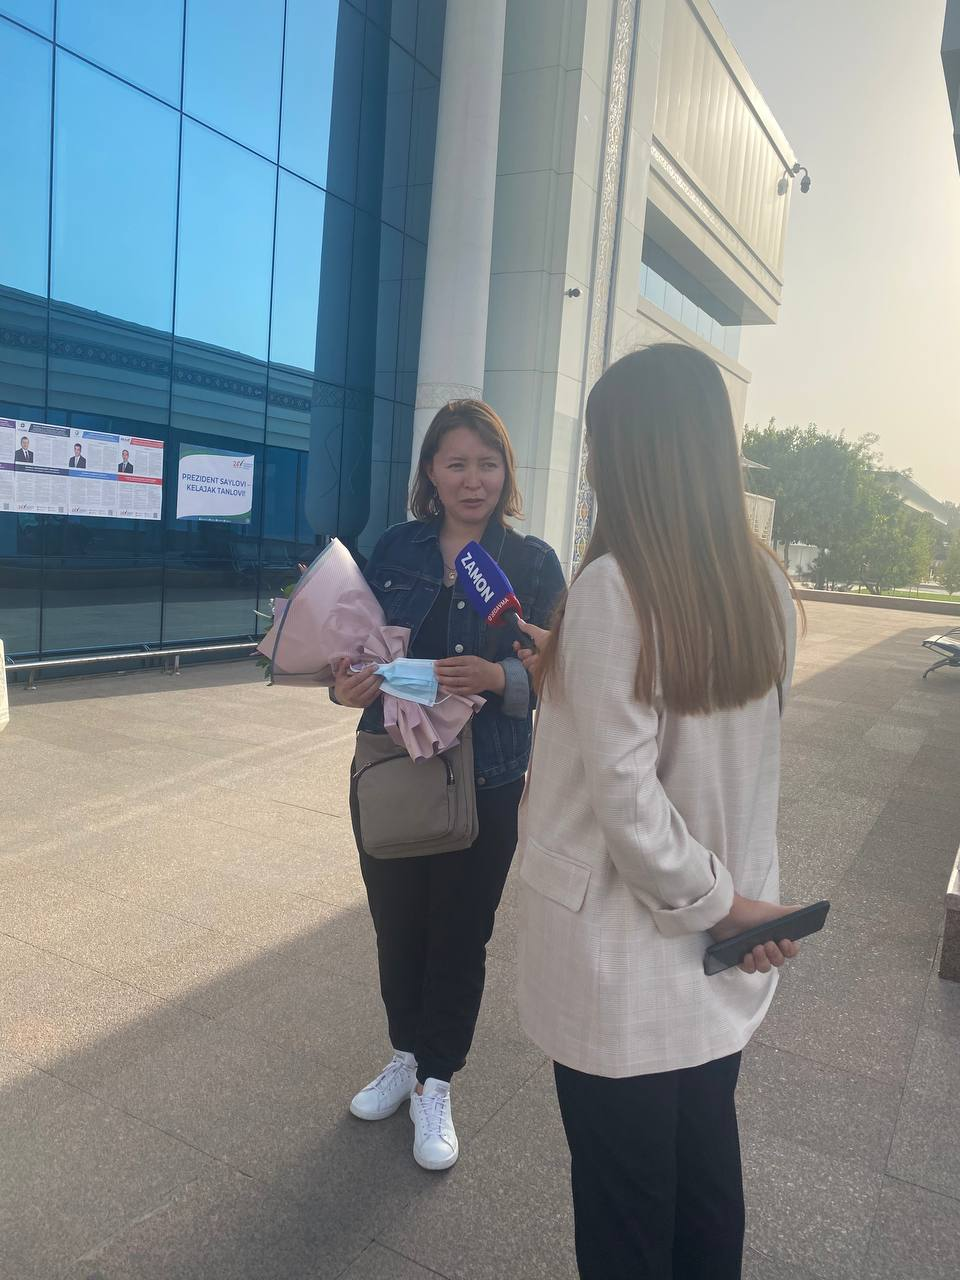 Actress Samal Yeslyamova, who participated at the Cannes Film Festival, has arrived in Tashkent